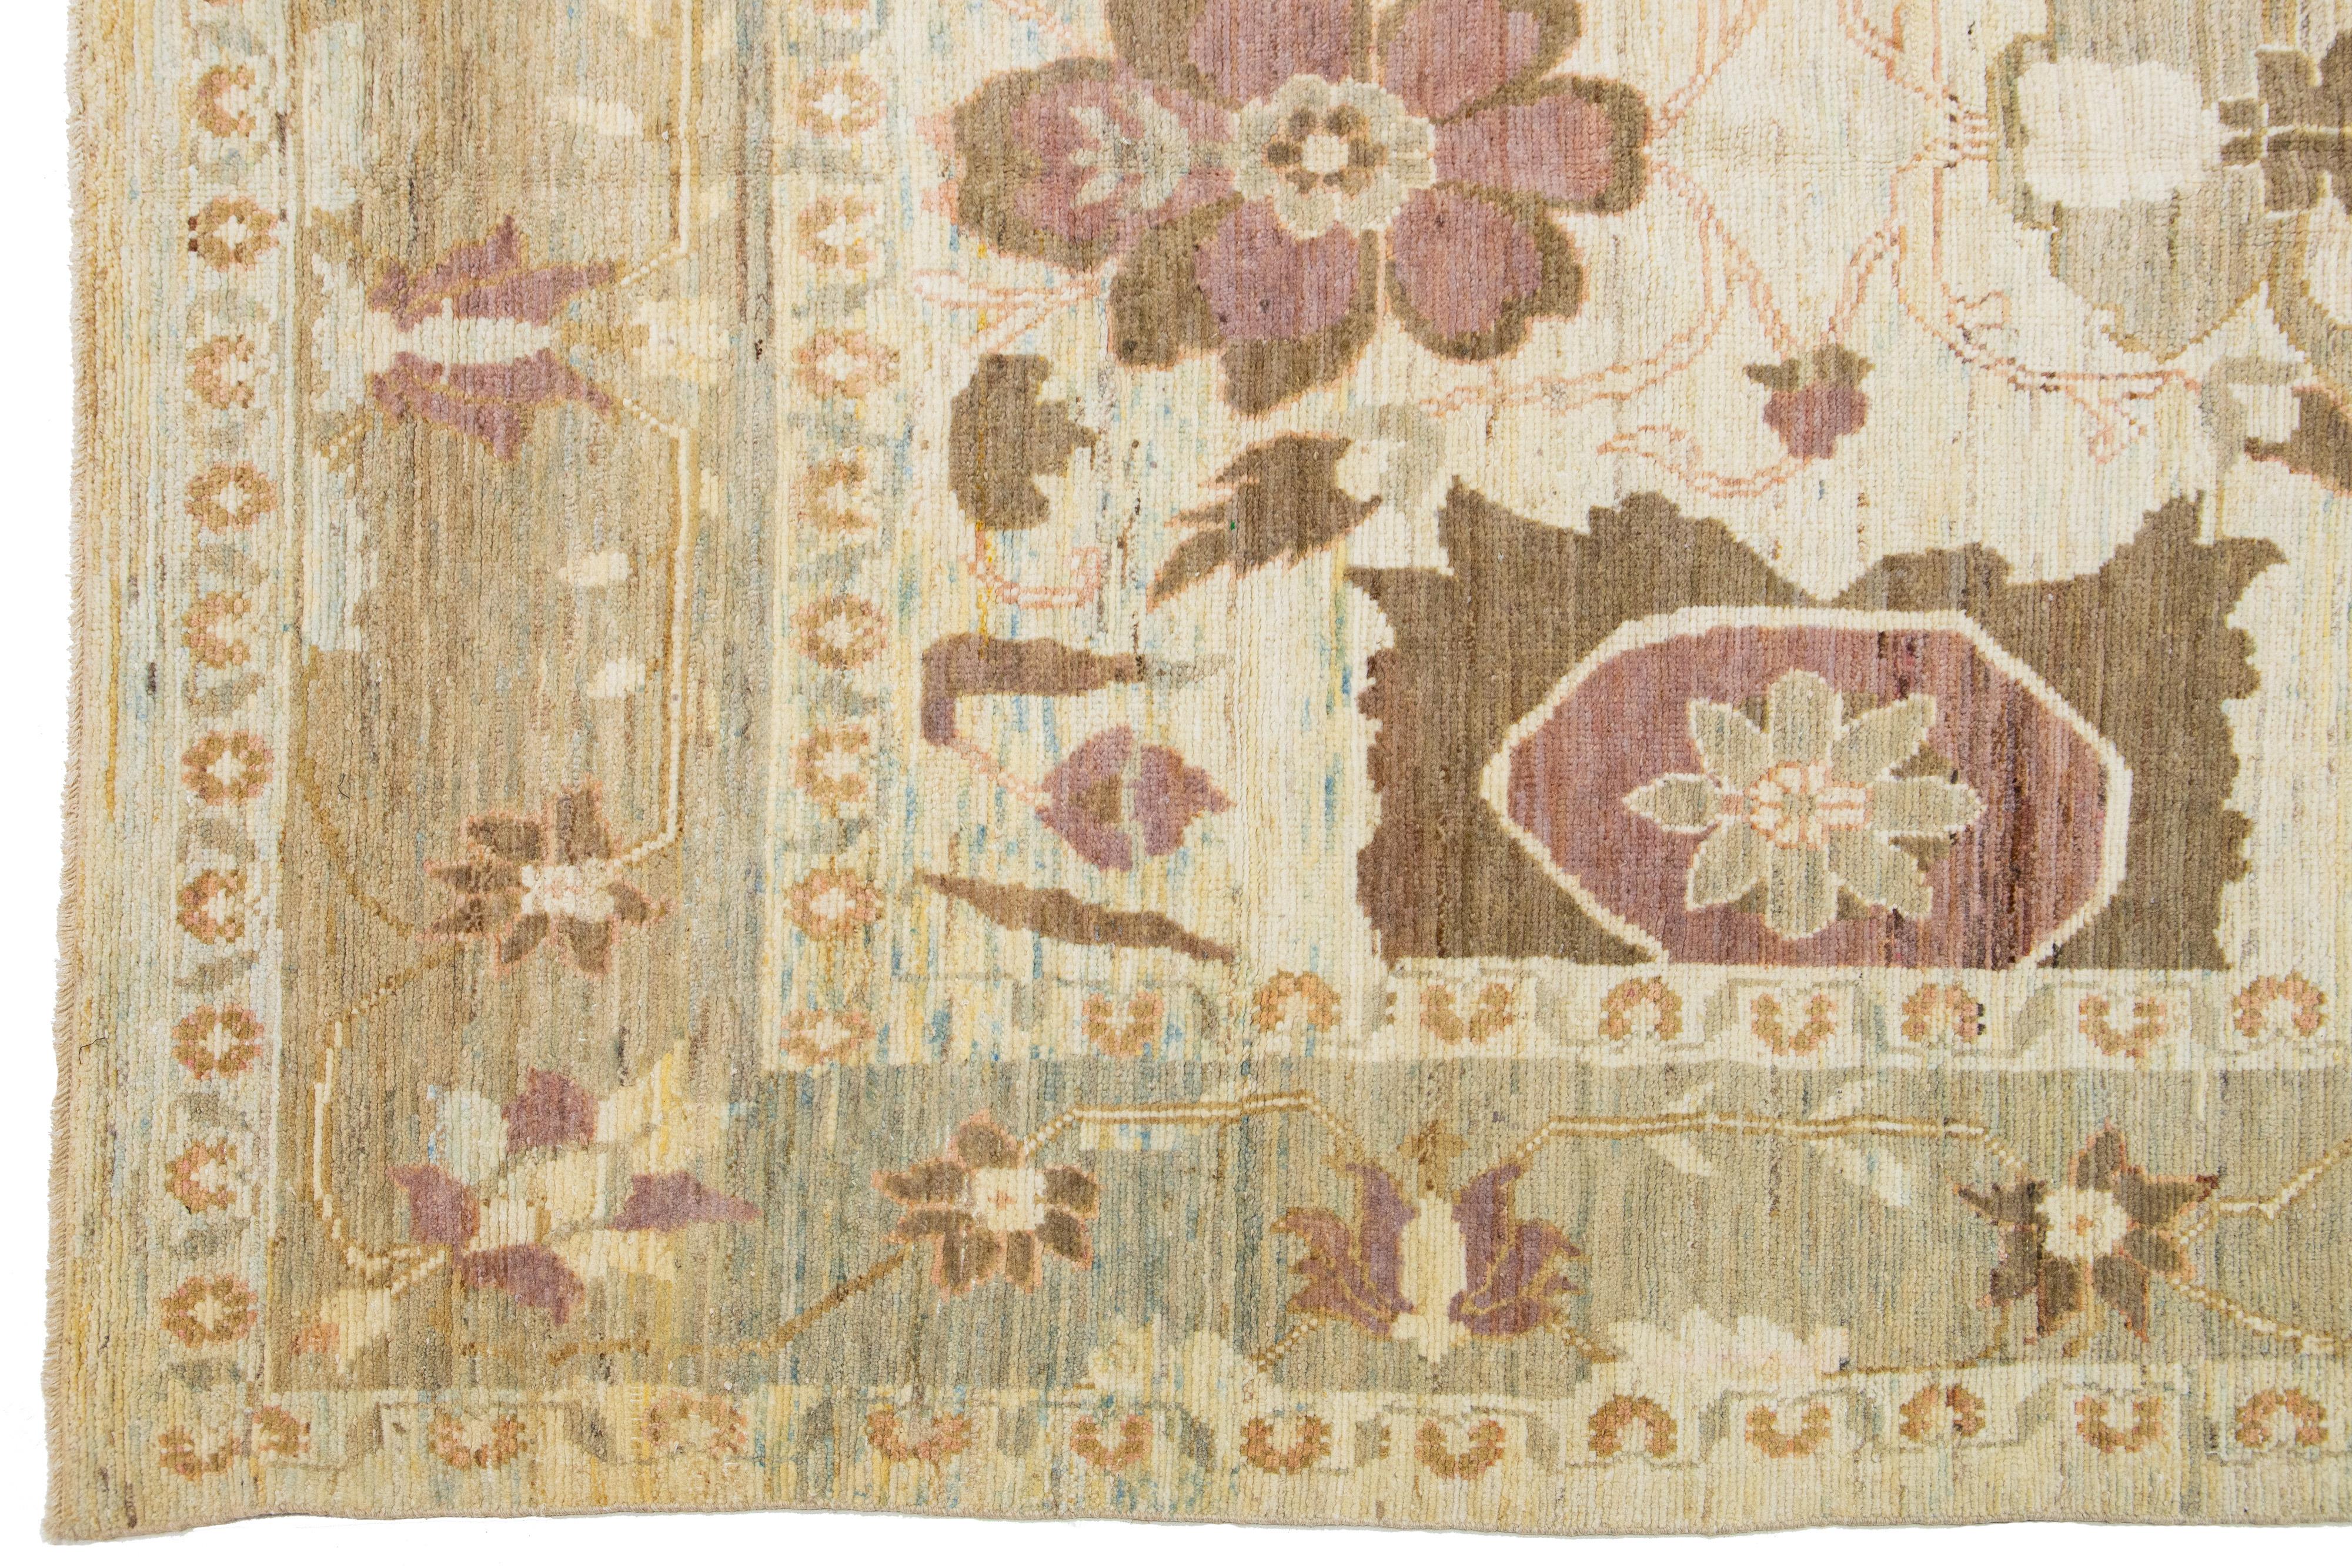 Allover Floral Contemporary Oushak style Handmade Wool Rug In Beige In New Condition For Sale In Norwalk, CT